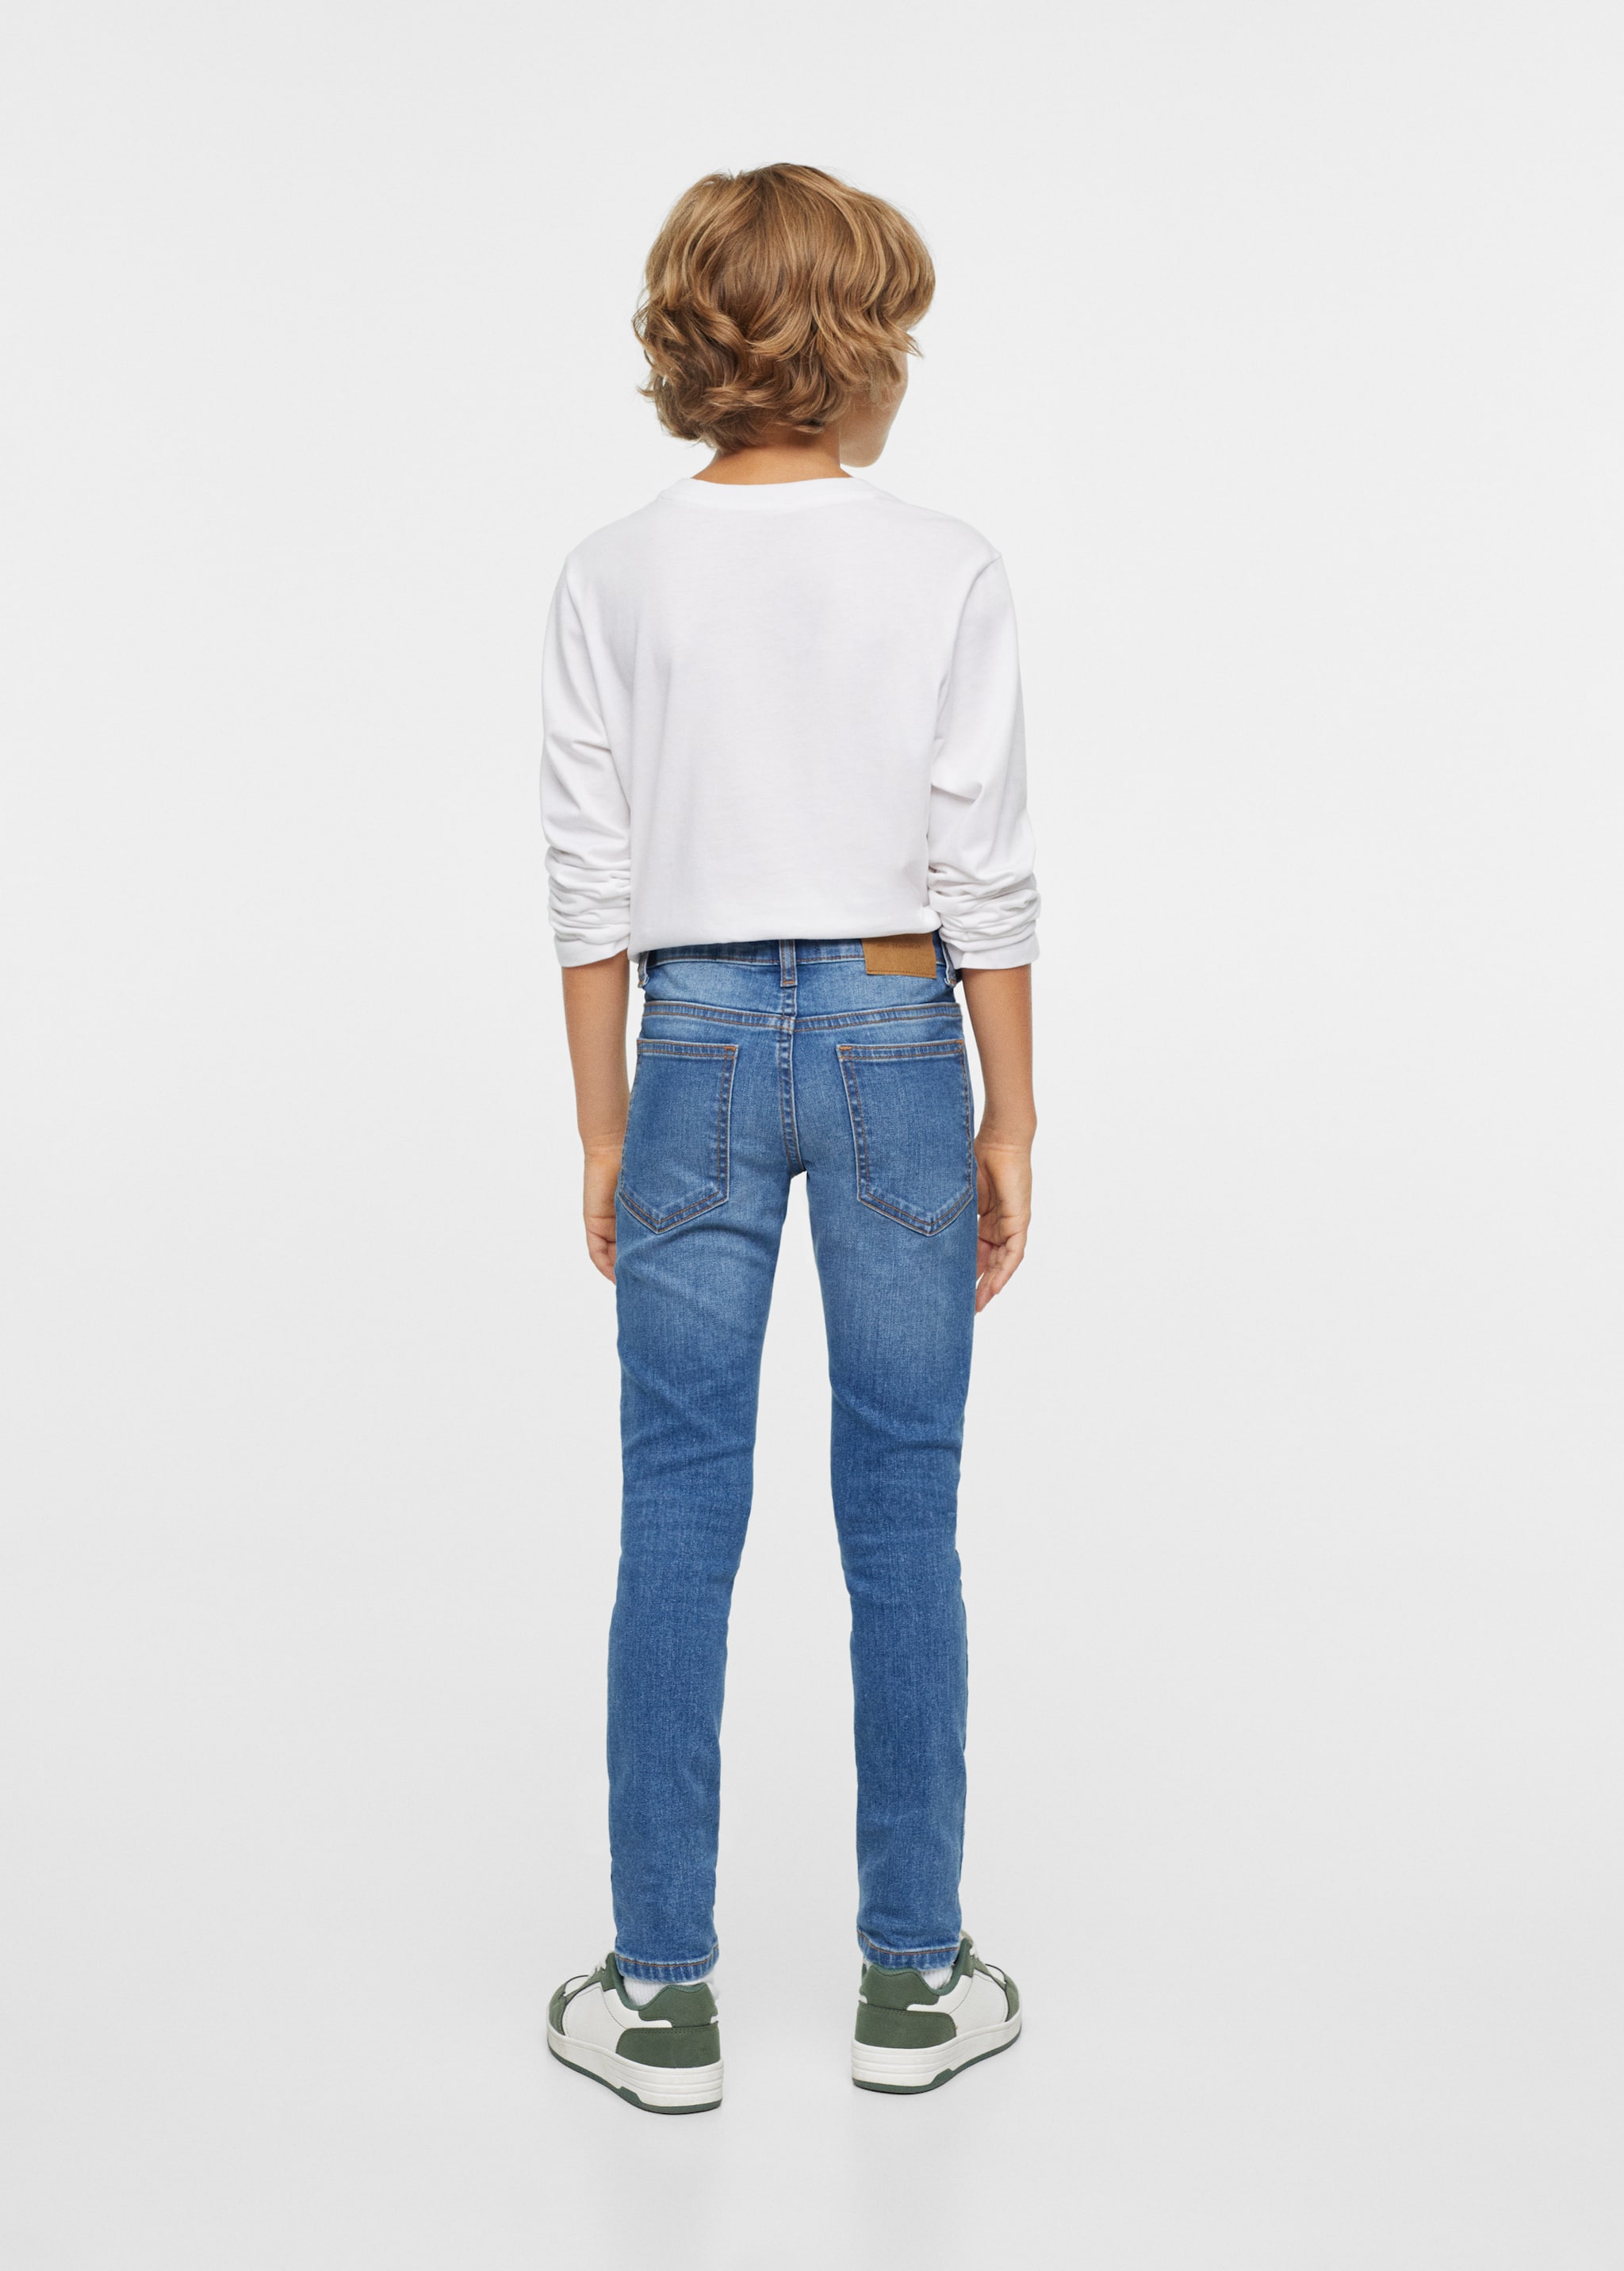 Skinny jeans - Details of the article 3